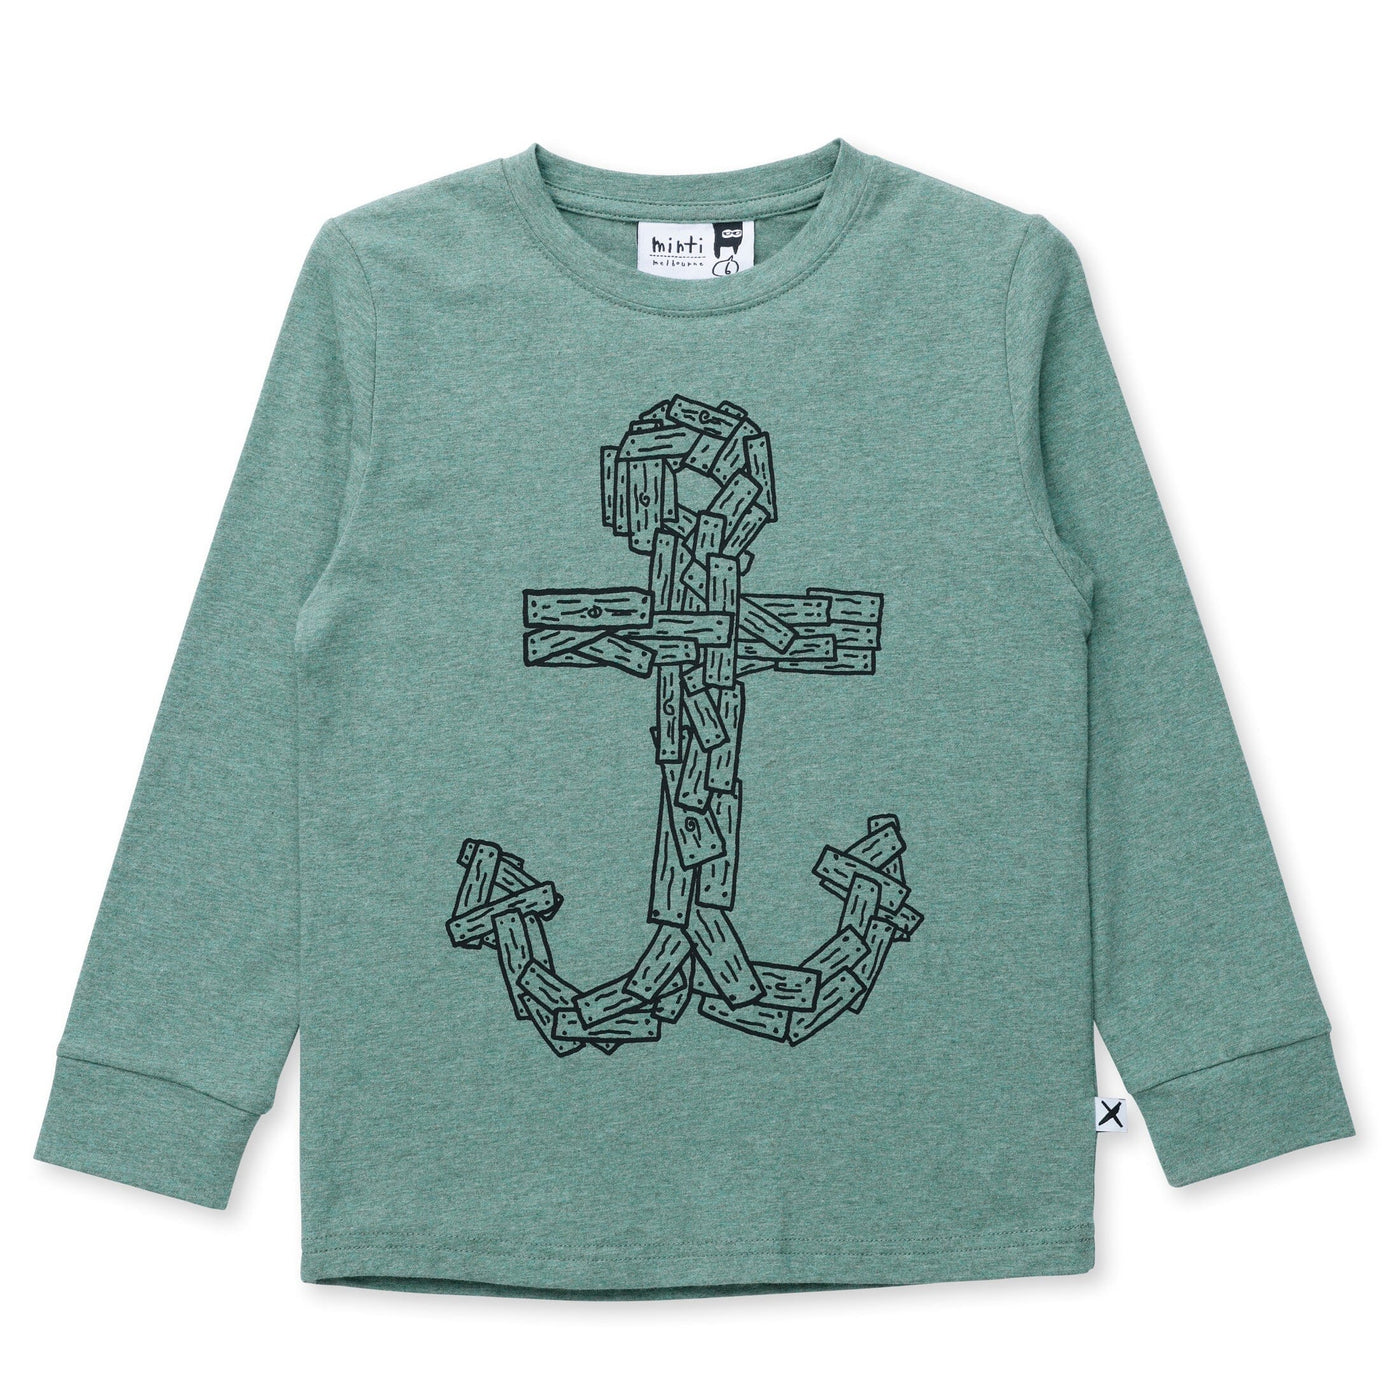 Minti Wooden Anchor Tee - Forest Marle Long Sleeve T-Shirt Minti 